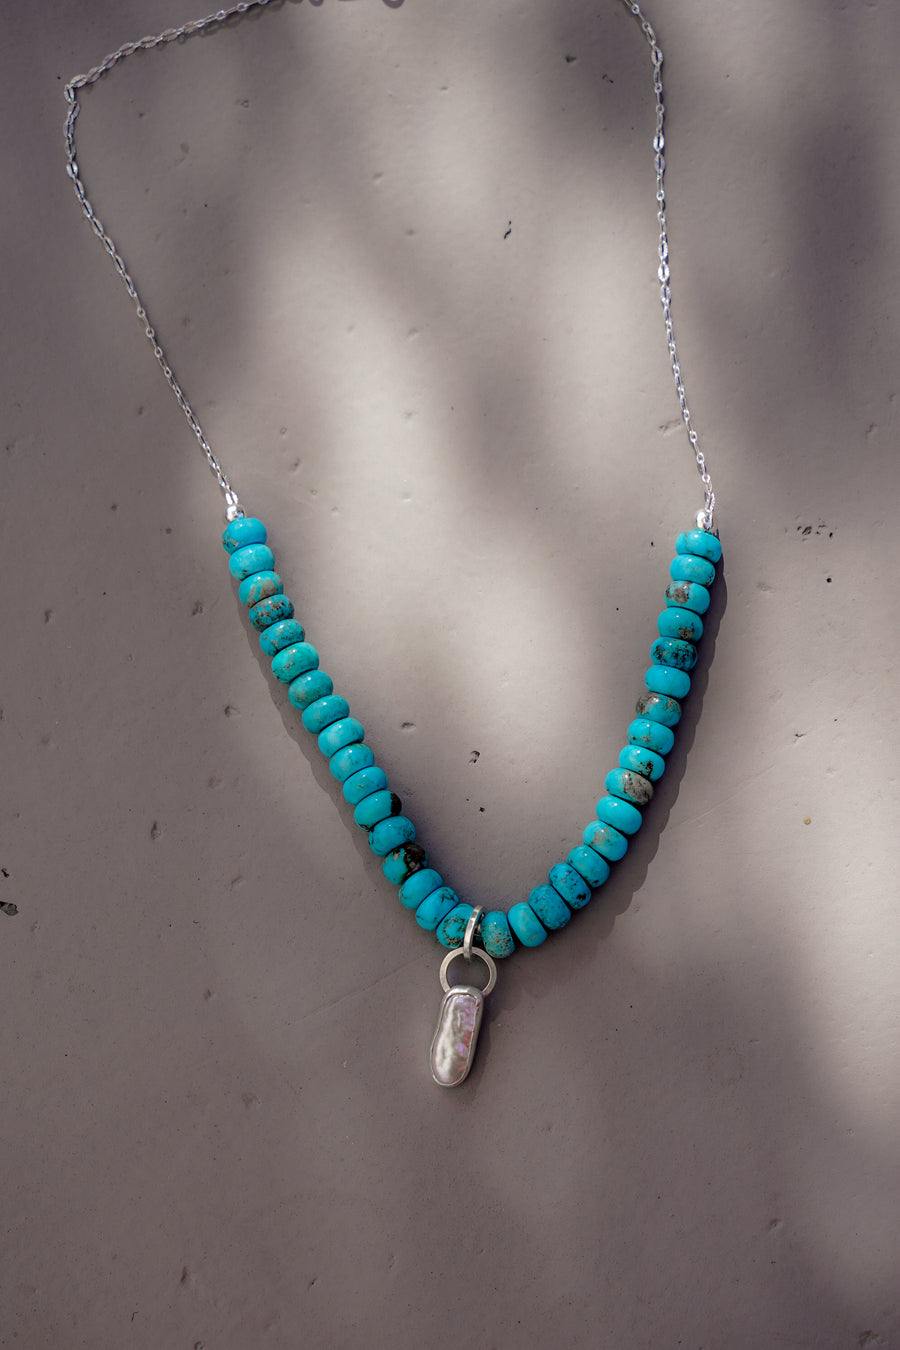 Pearl Necklace with Kingman Turquoise Beads